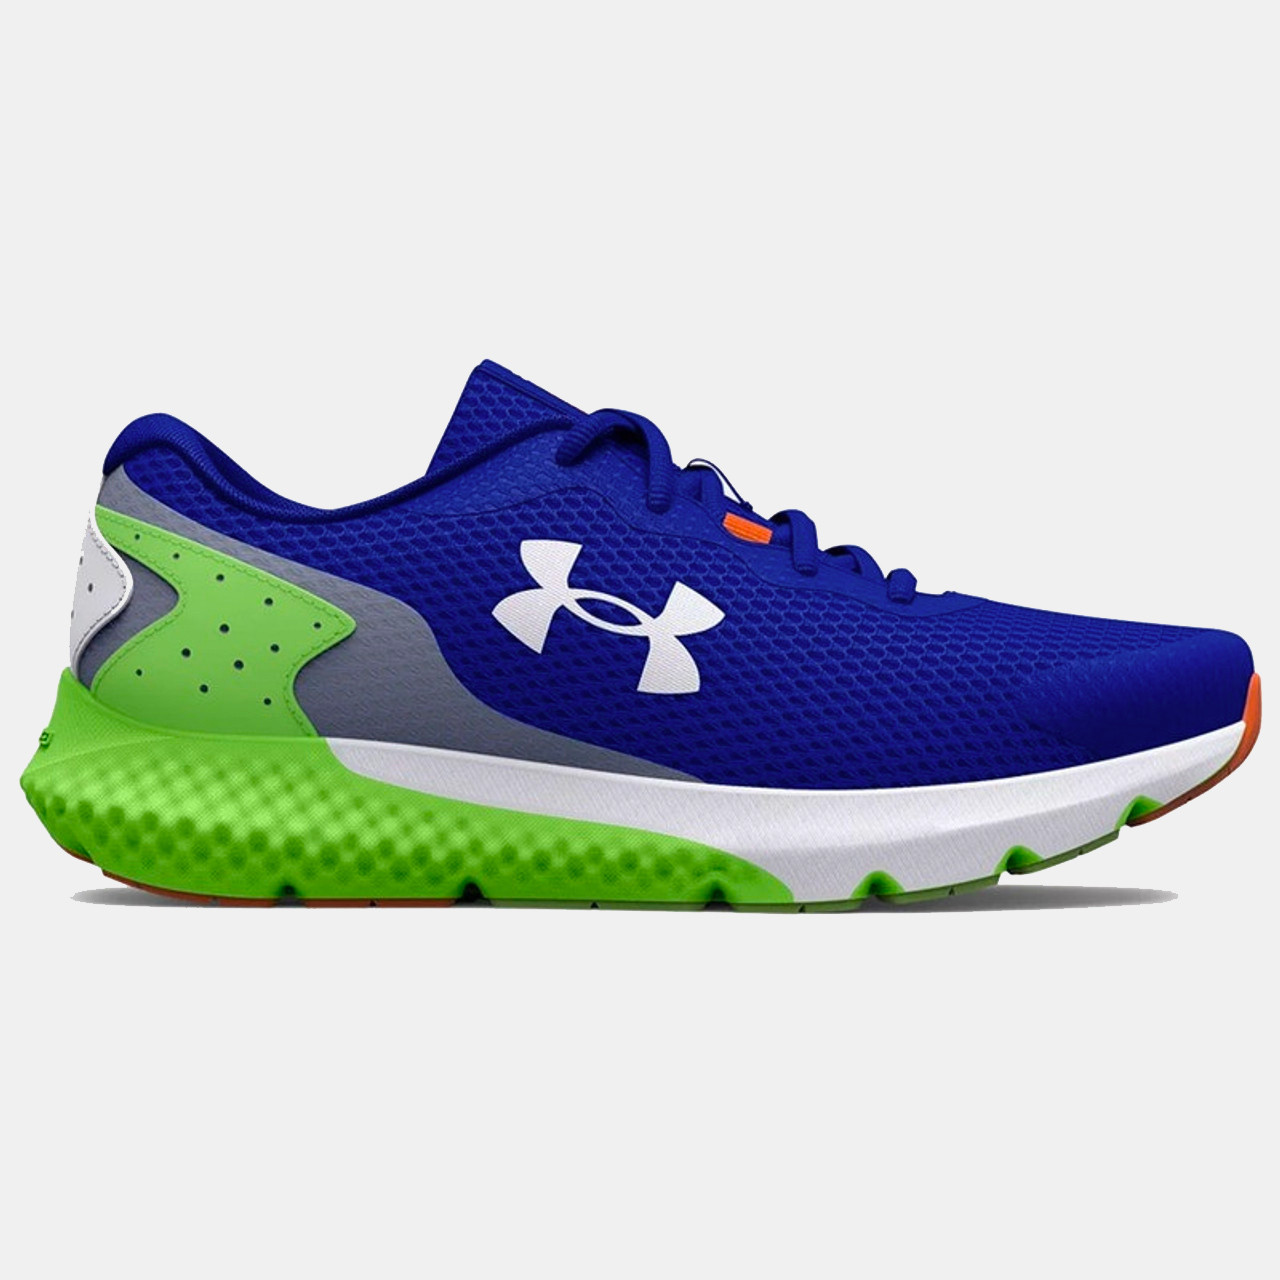 Under Armour Charged Rogue 3 Waterproof